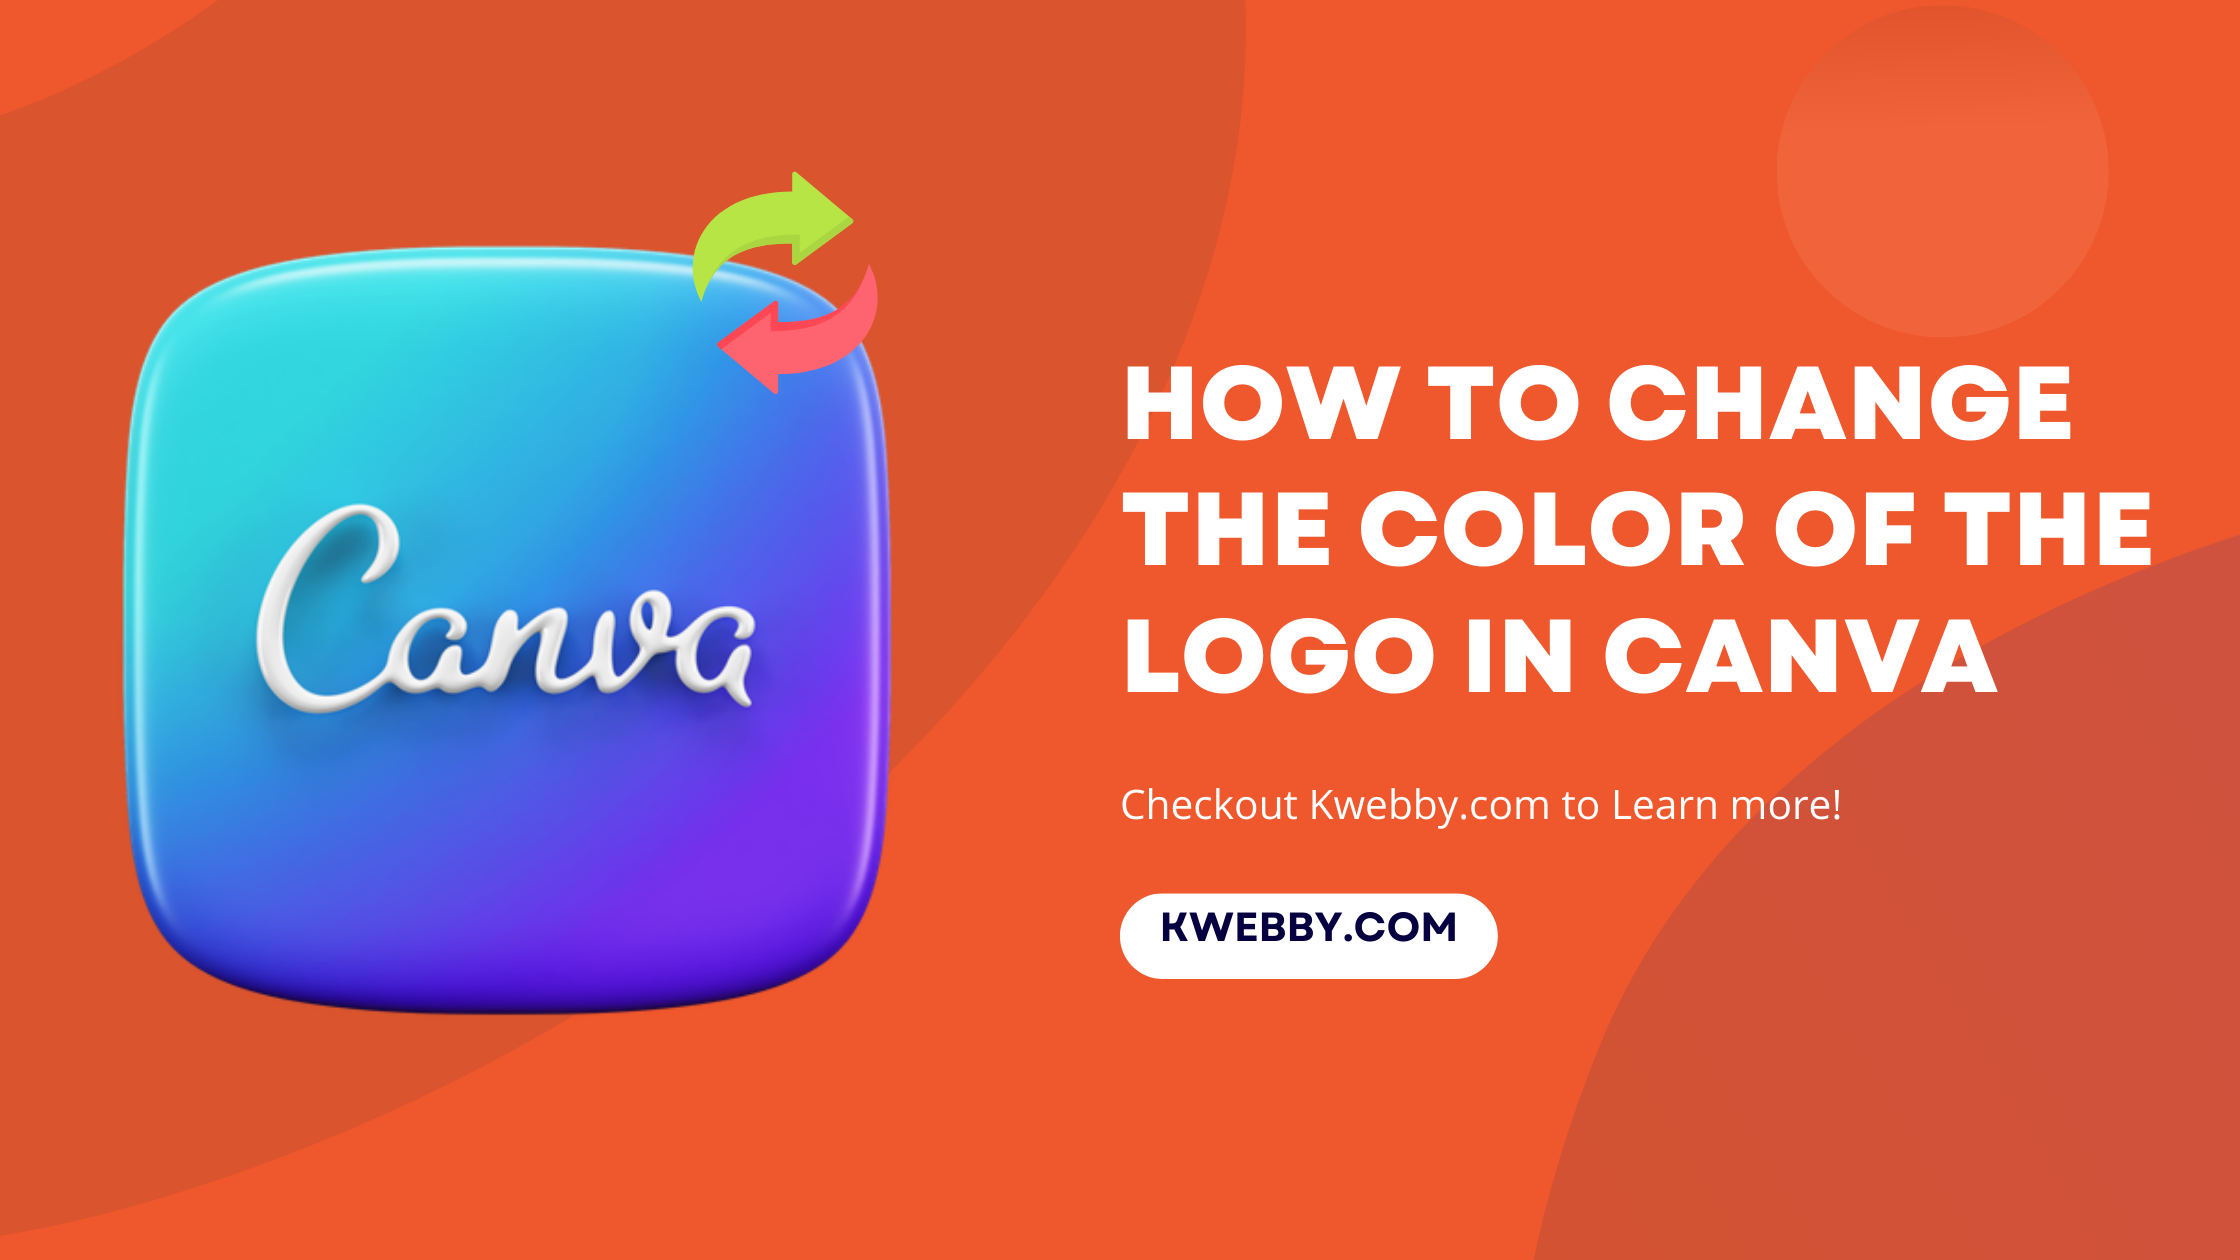 How to change the Color of the logo in Canva